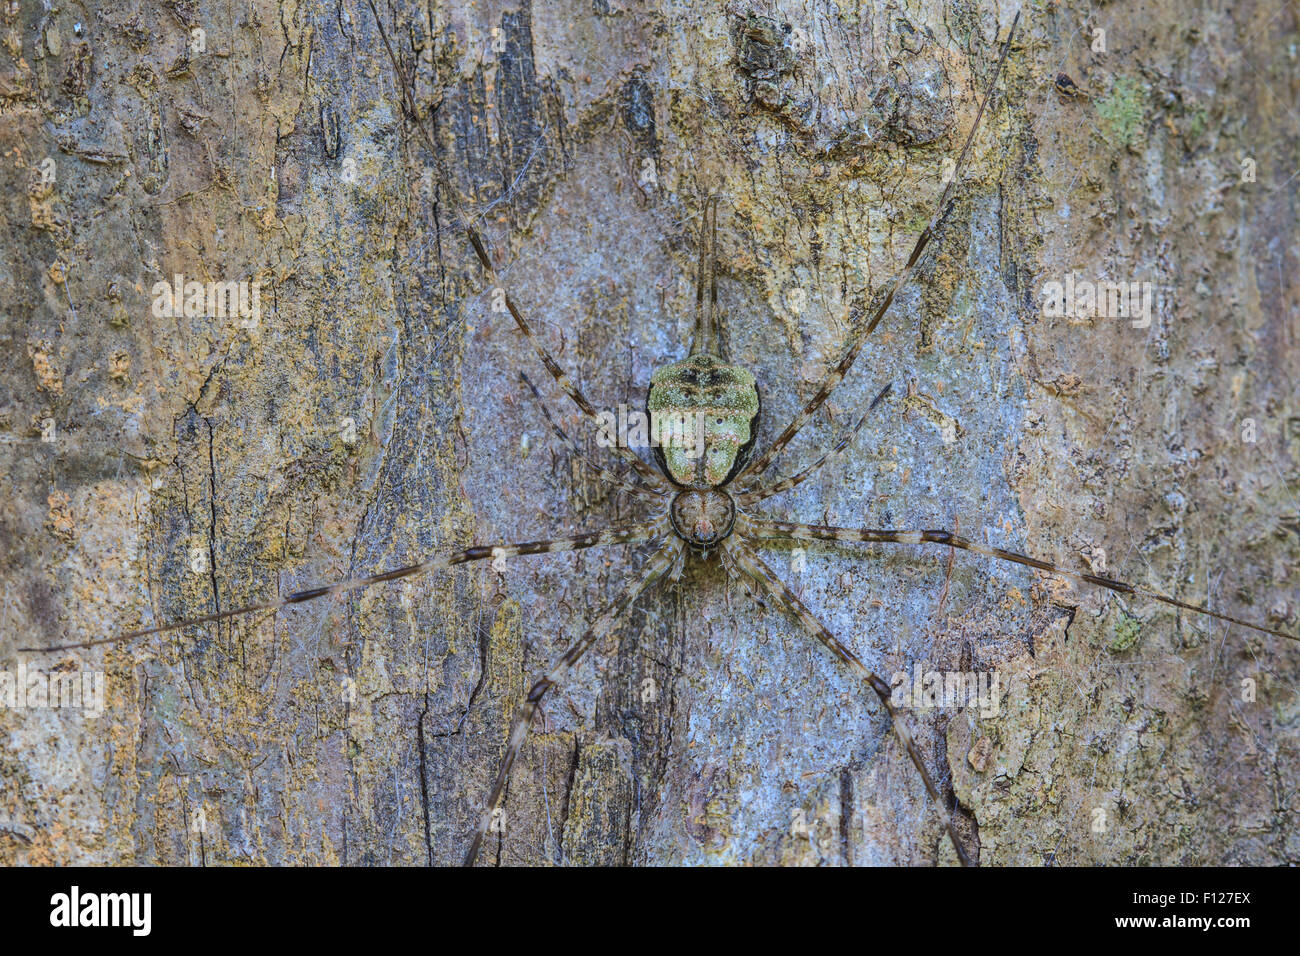 spider in forest, abstract in nature background Stock Photo